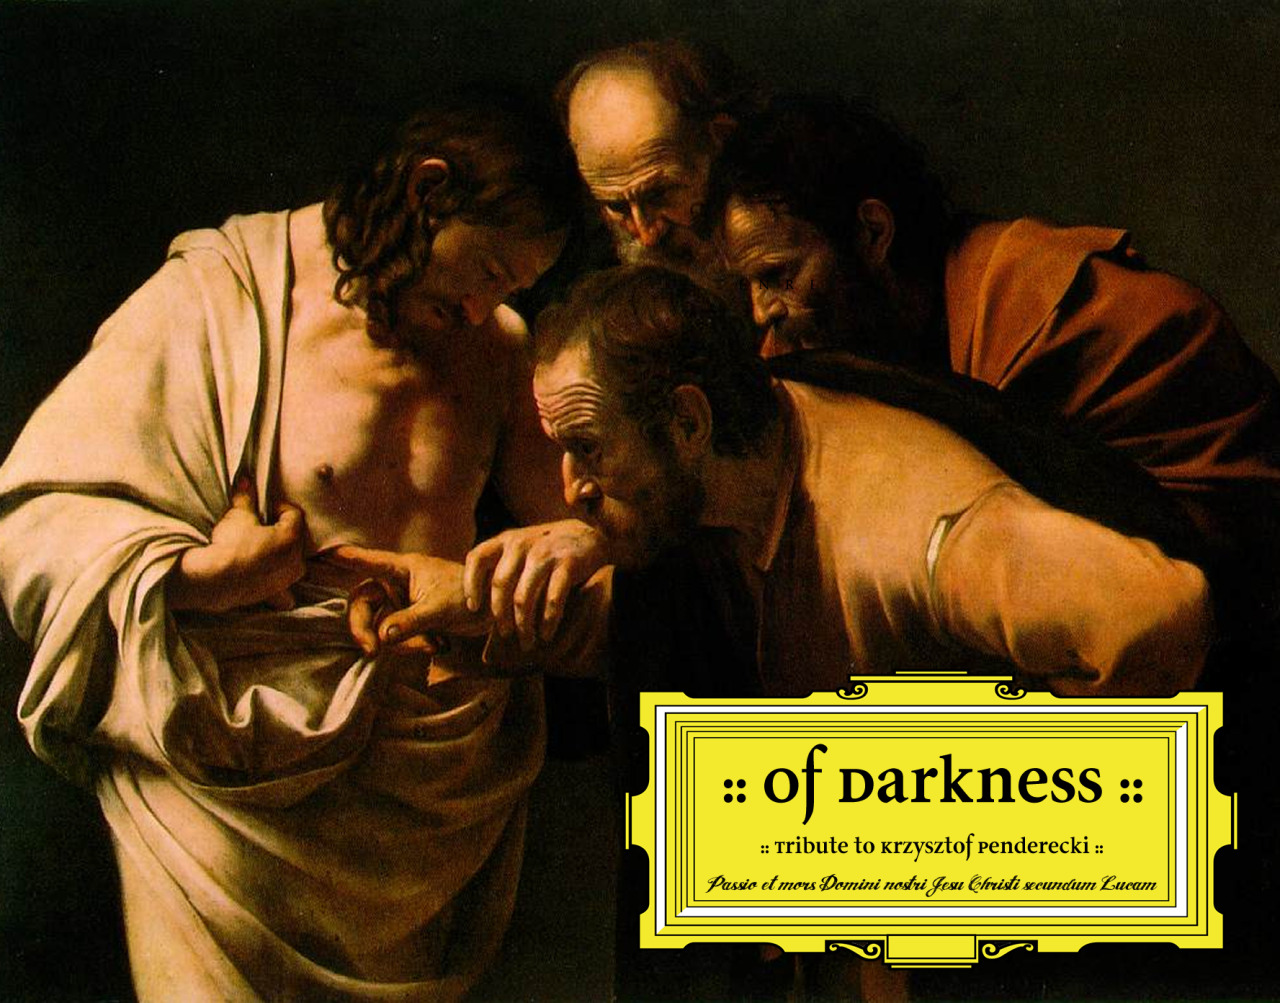 Of Darkness - Tribute to Krzysztof Penderecki - Passio et mors Domini nostri Jesu Christi secundum Lucam
Label: GH Records - GH125 CD
Format: CD, Album
Country: Spain
Released: 01 Jan 2015
Style: Funeral Death Music
The new work Of Darkness continues...